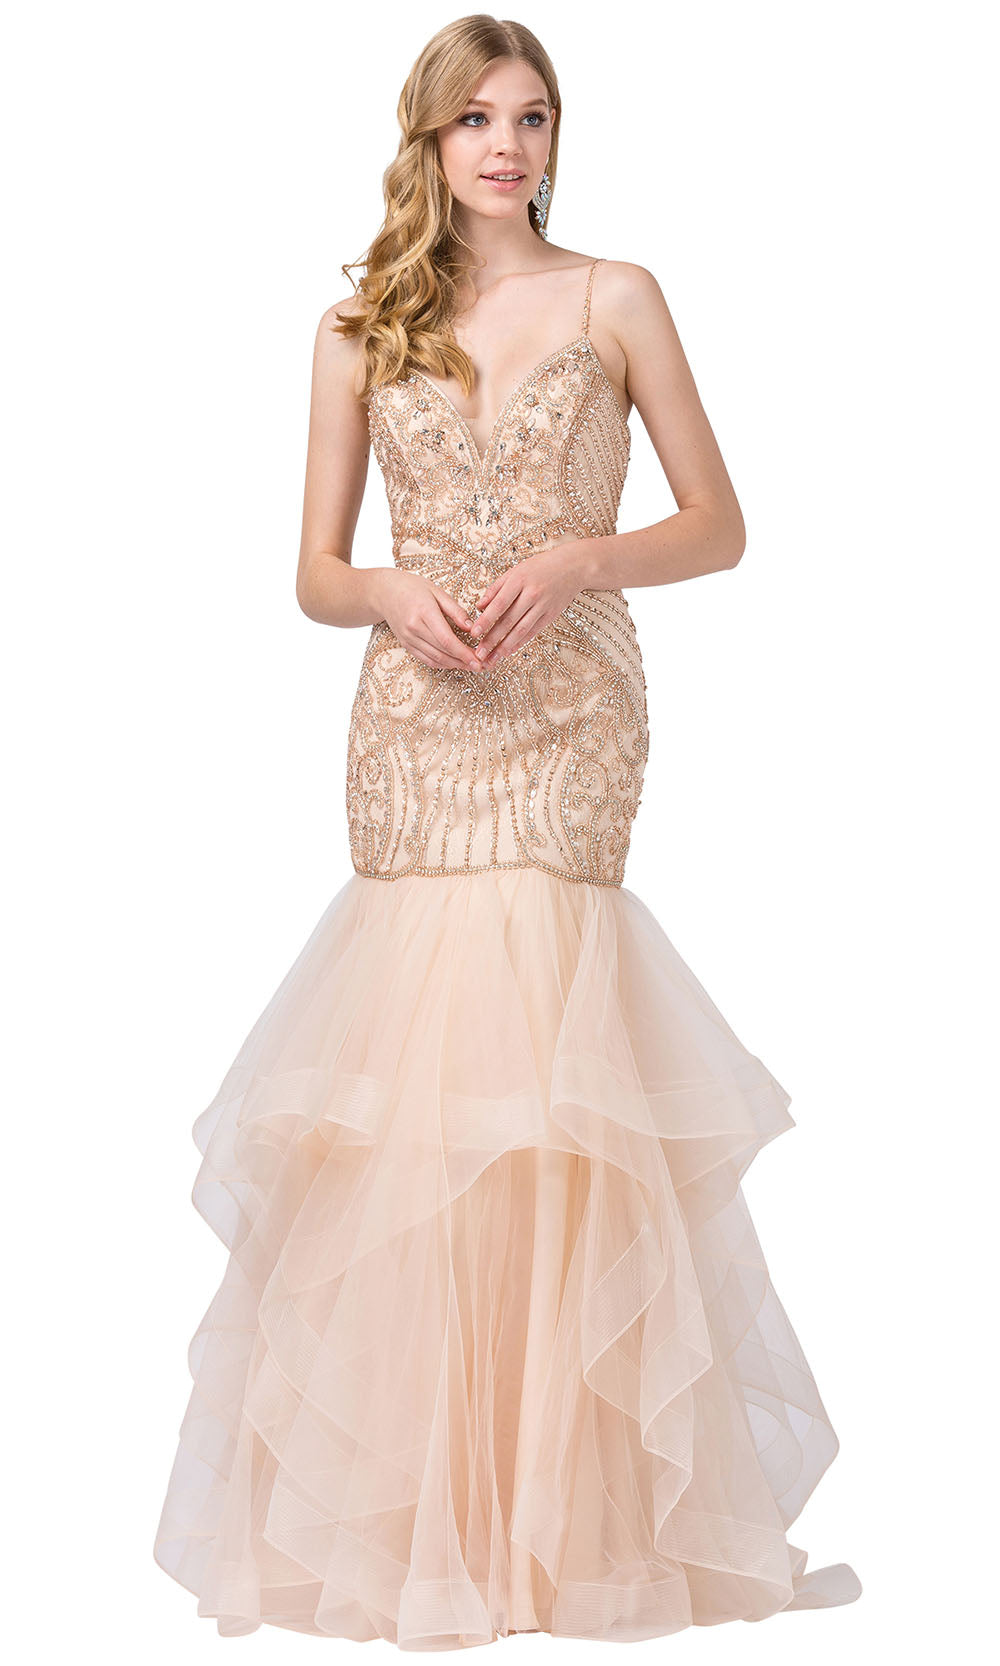 Dancing Queen - 2523 Jeweled Sheer Flared Trumpet Dress In Champagne & Gold